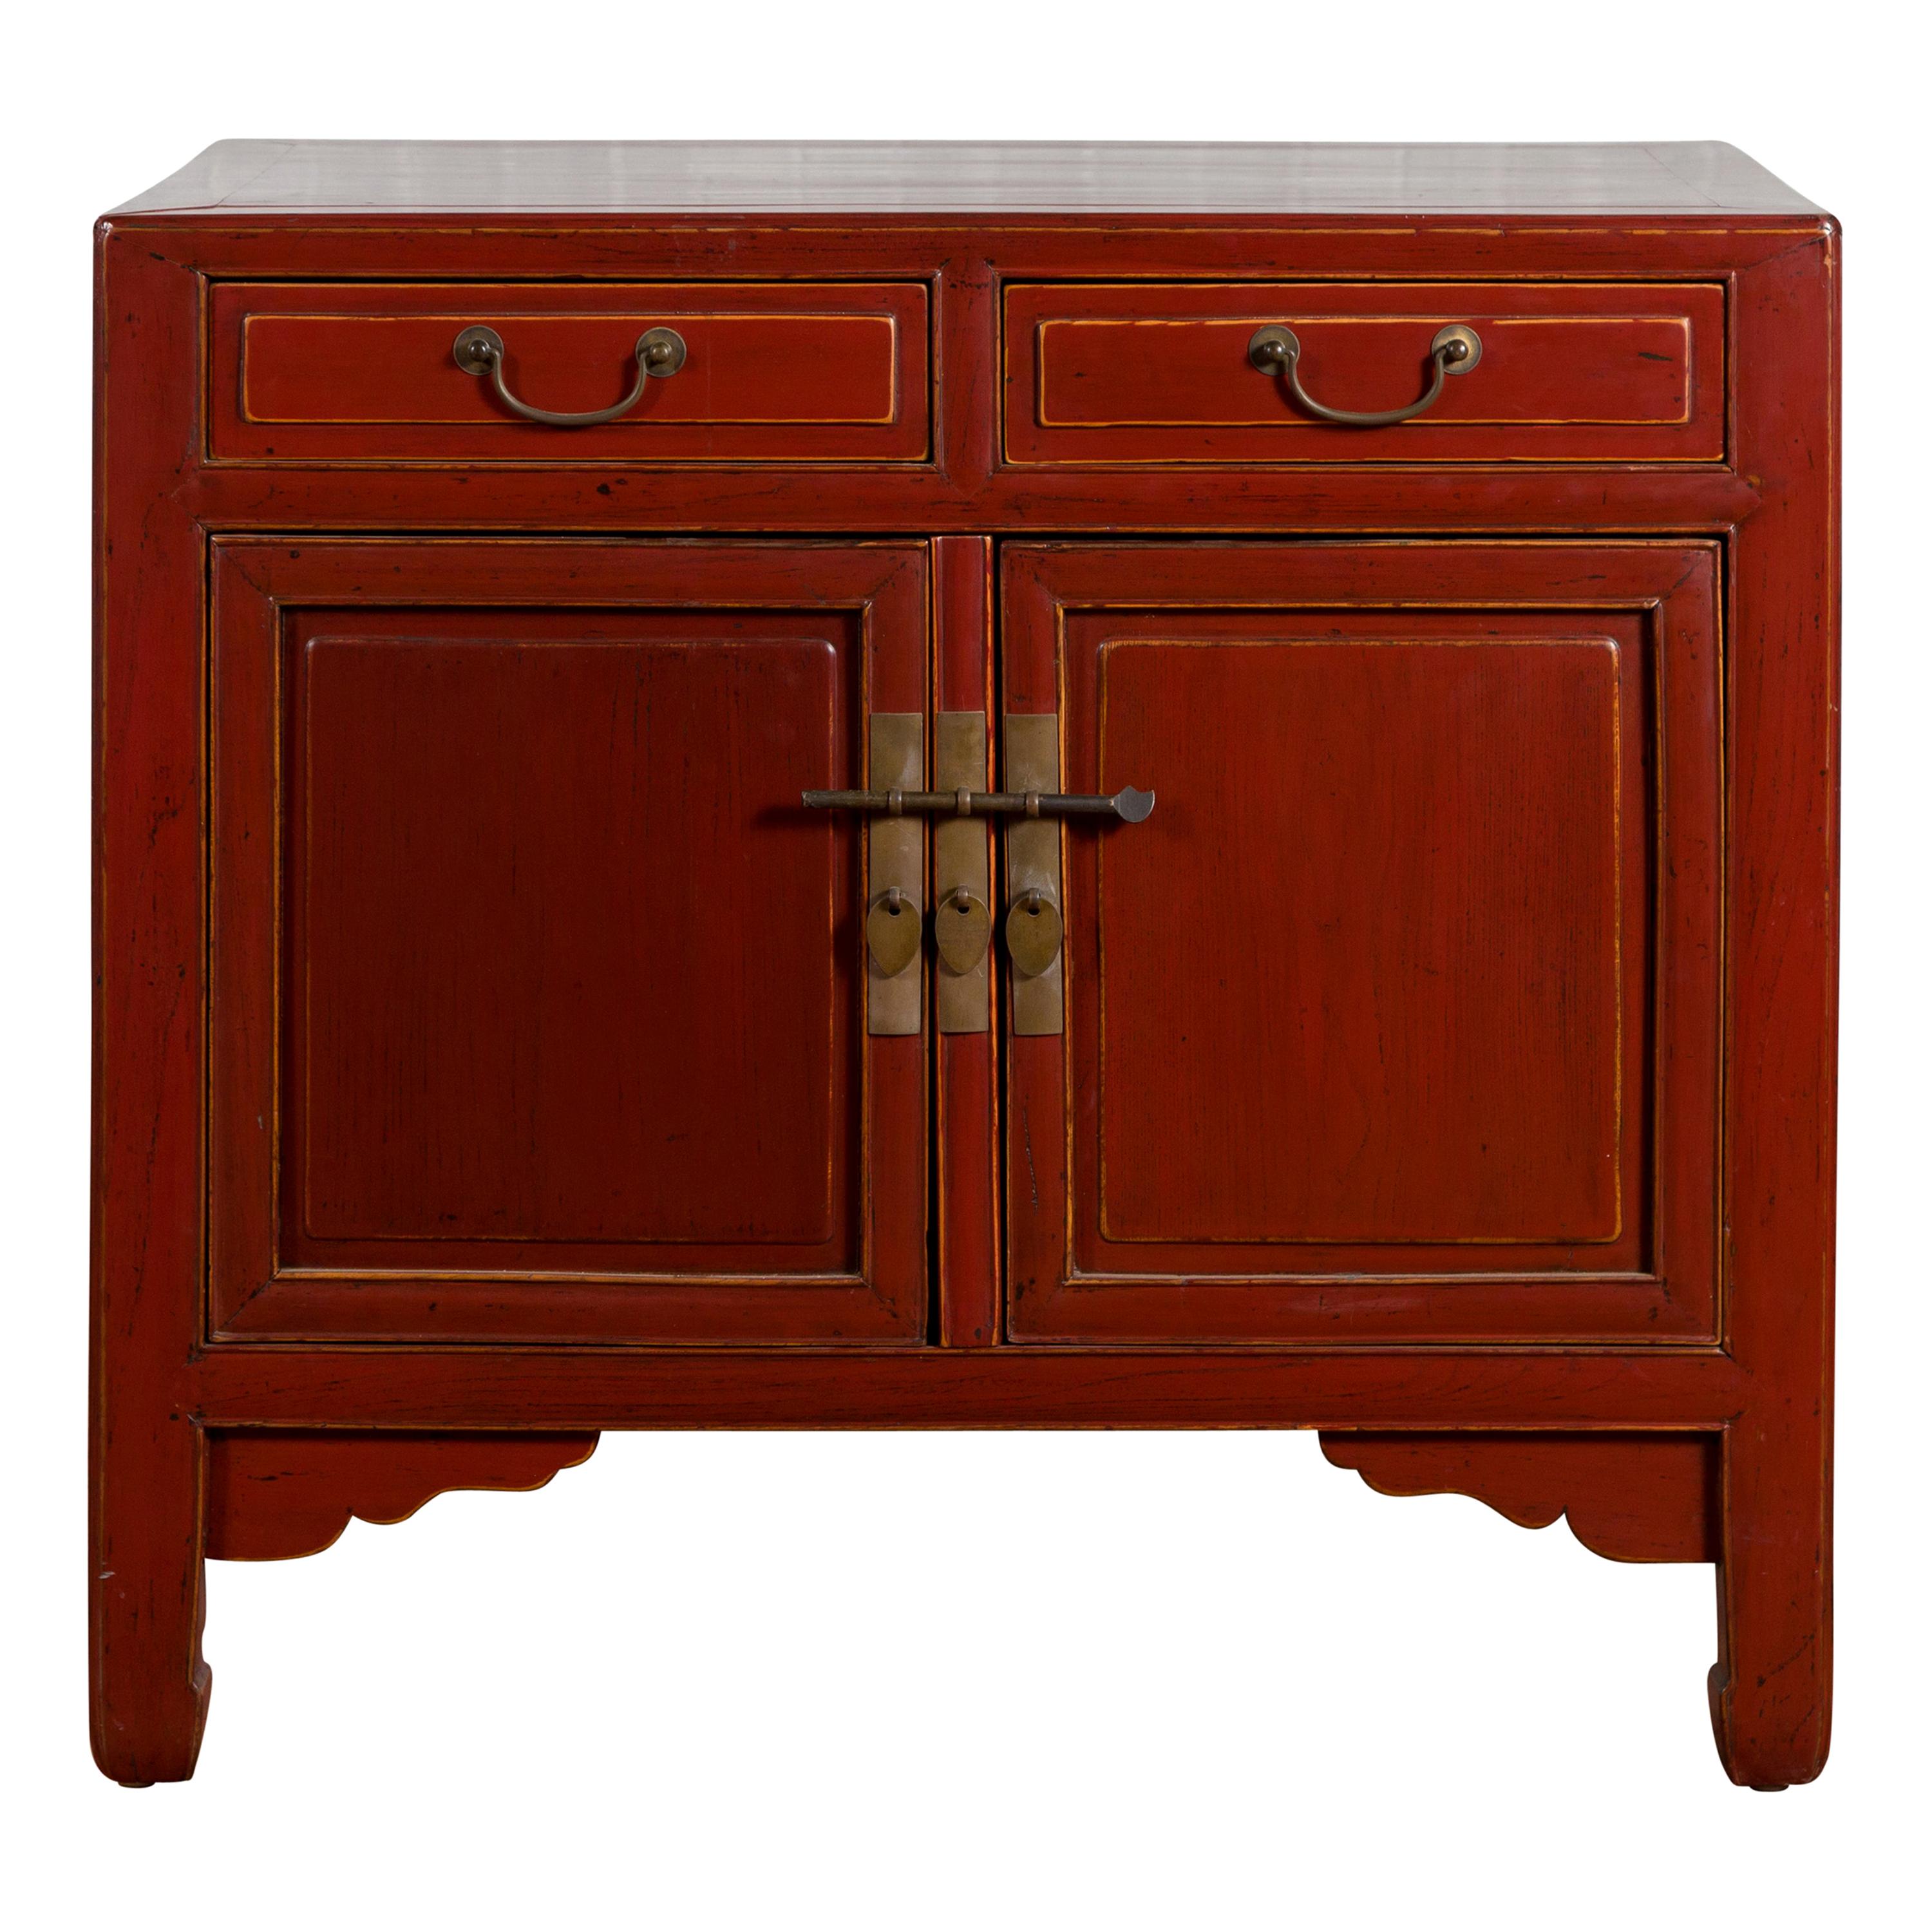 Red Lacquered 19th Century Qing Dynasty Elm Cabinet with Drawers and Doors